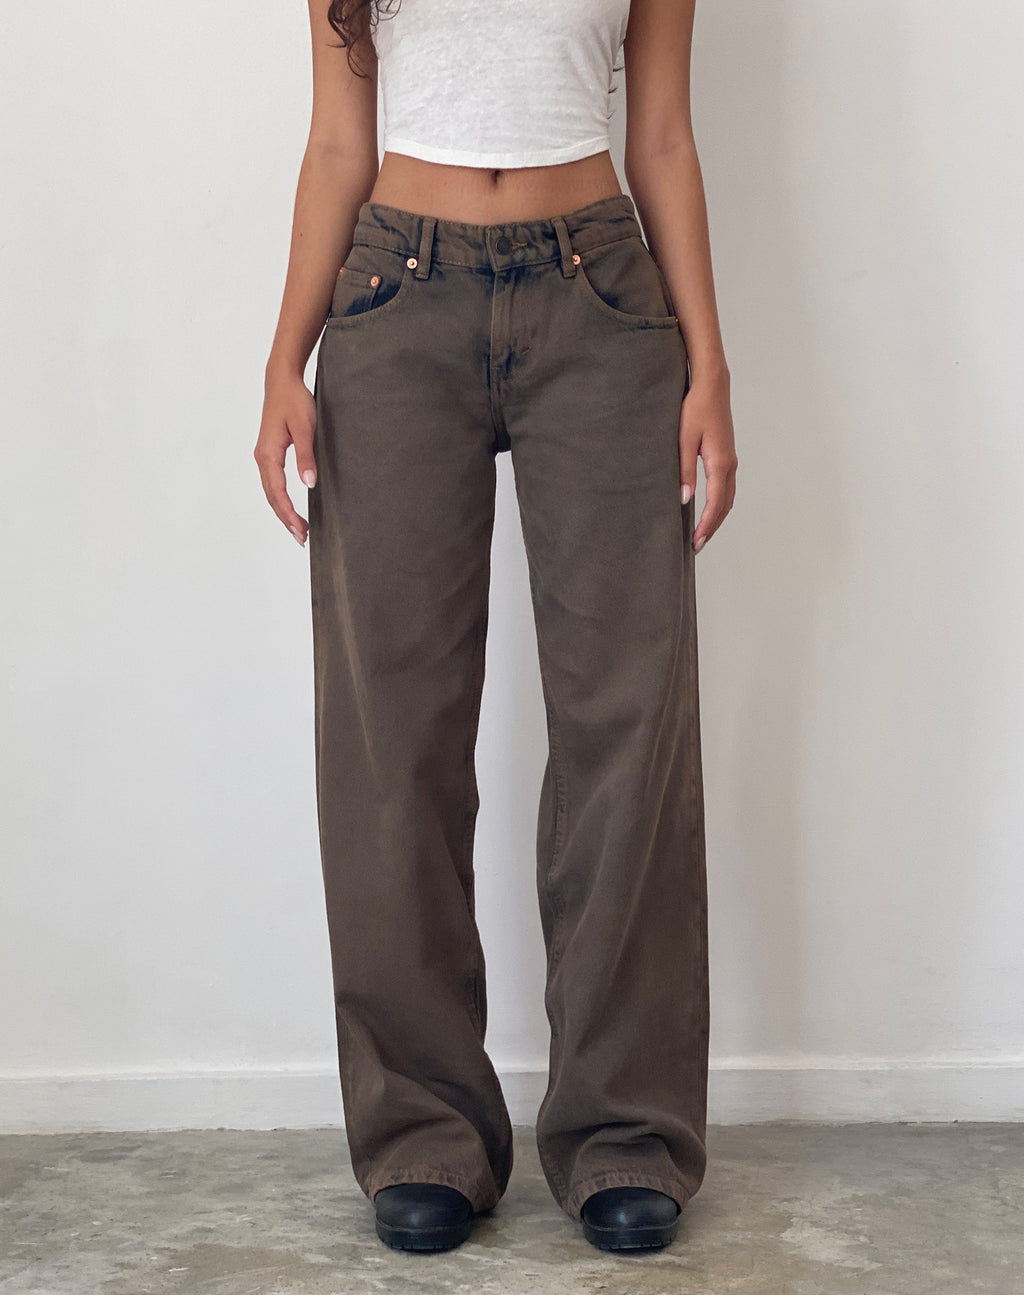 Geräumige extra weite Low Rise Jeans in Dark Sand